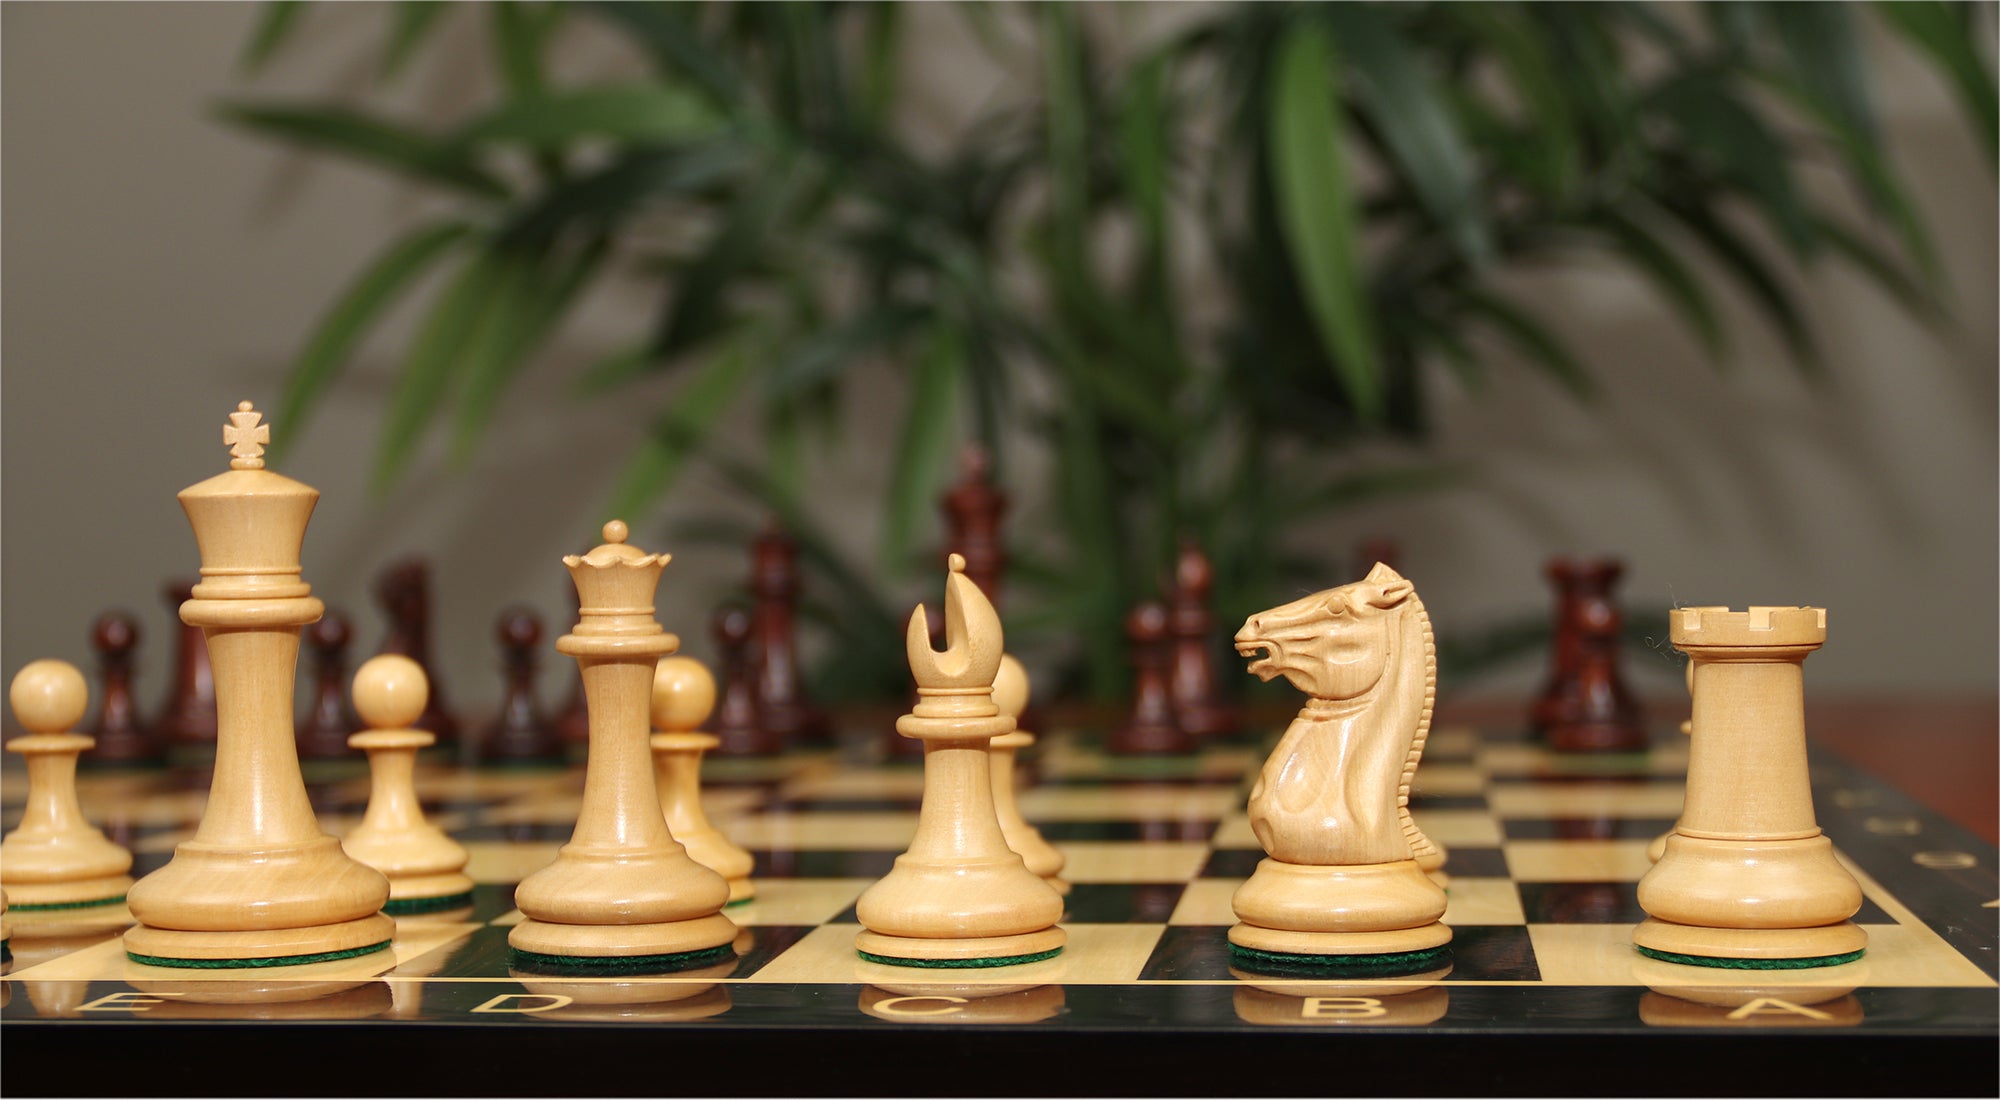 Morphy Cooke 1849-50 Vintage 3.5" Reproduction Chess Set in Natural/Mahogany Stained Boxwood